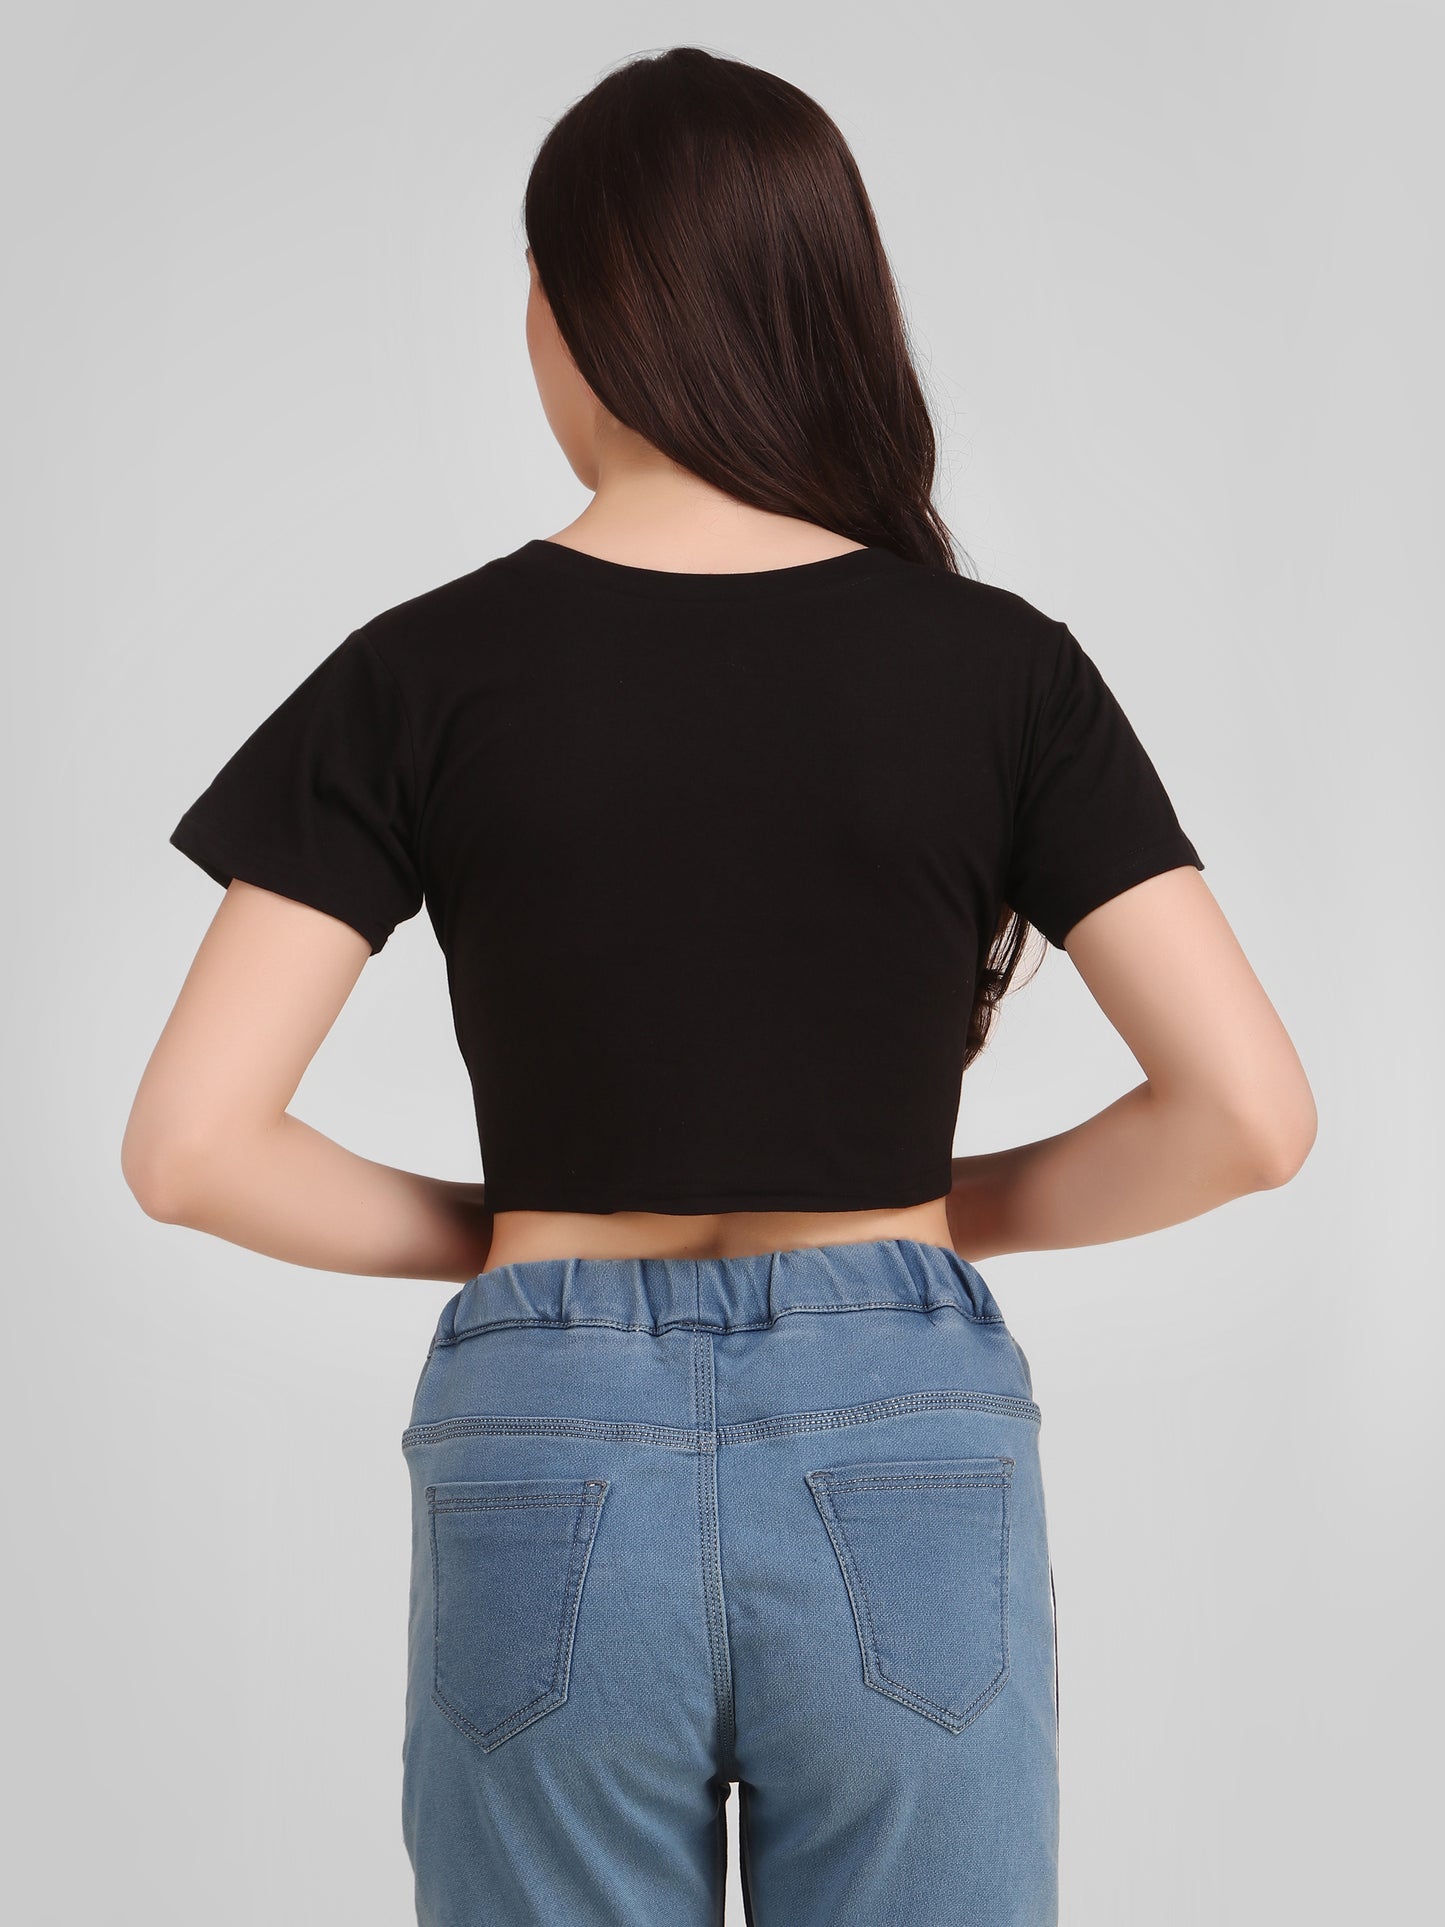 Black Coloured Butterfly Print Trendy Crop Top!!